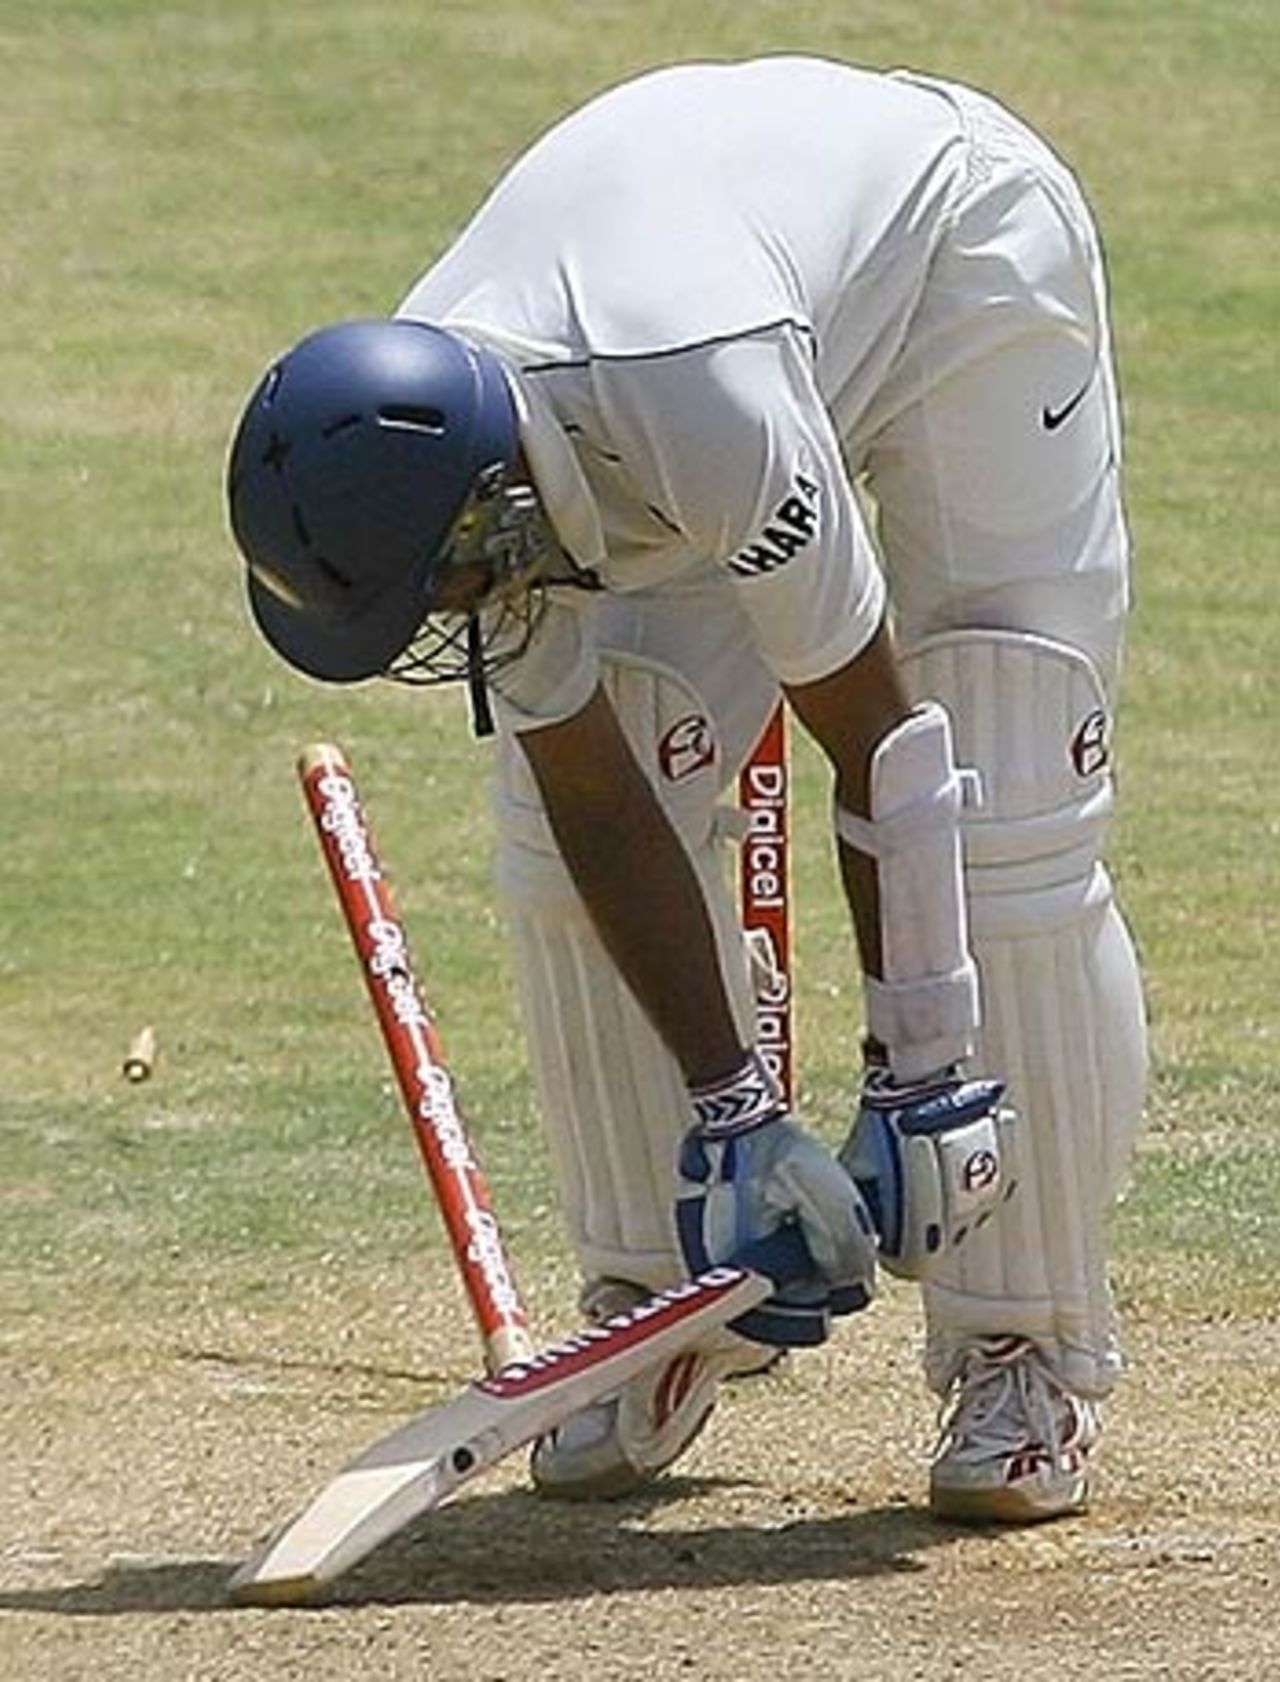 Rahul Dravid was done in by a shooter from Colly Colleymore, West Indies v India, 4th Test, Jamaica, 3rd day, July 2, 2006